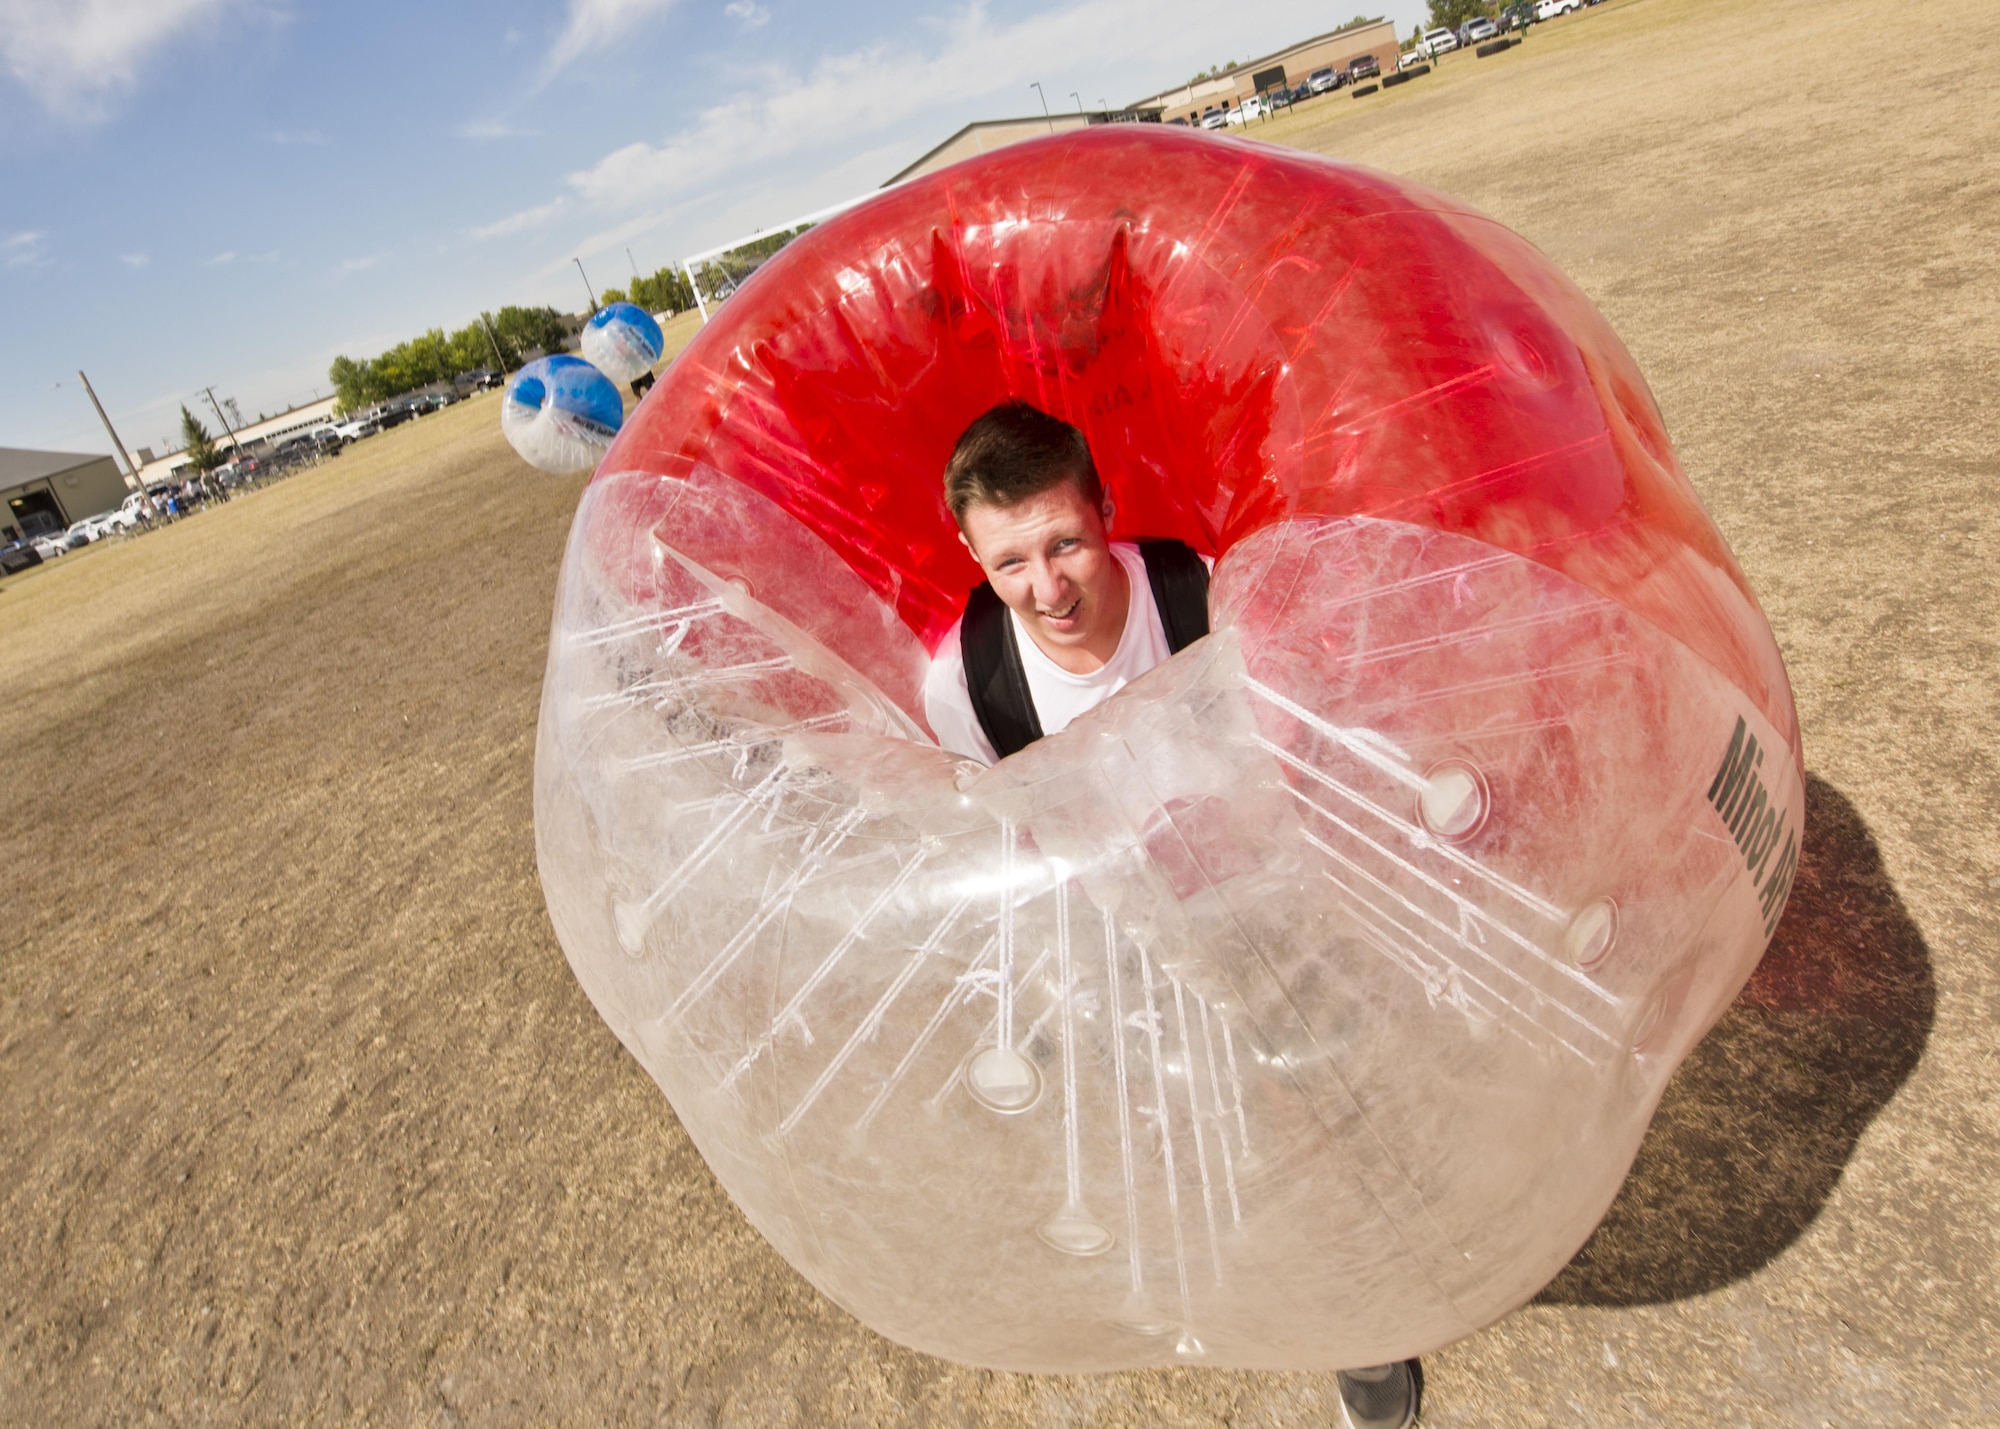 Airman 1st Class Christian Sullivan, 5th Bomb Wing Public Affairs photojournalist, pauses for a photo while playing knockerball during the Summer Games at Minot Air Force Base, N.D., Aug. 30, 2016. The Summer Games hosted new events included knockerball, build a boat and 4x200m freestyle relay. (U.S. Air Force photo/Airman 1st Class J.T. Armstrong)

